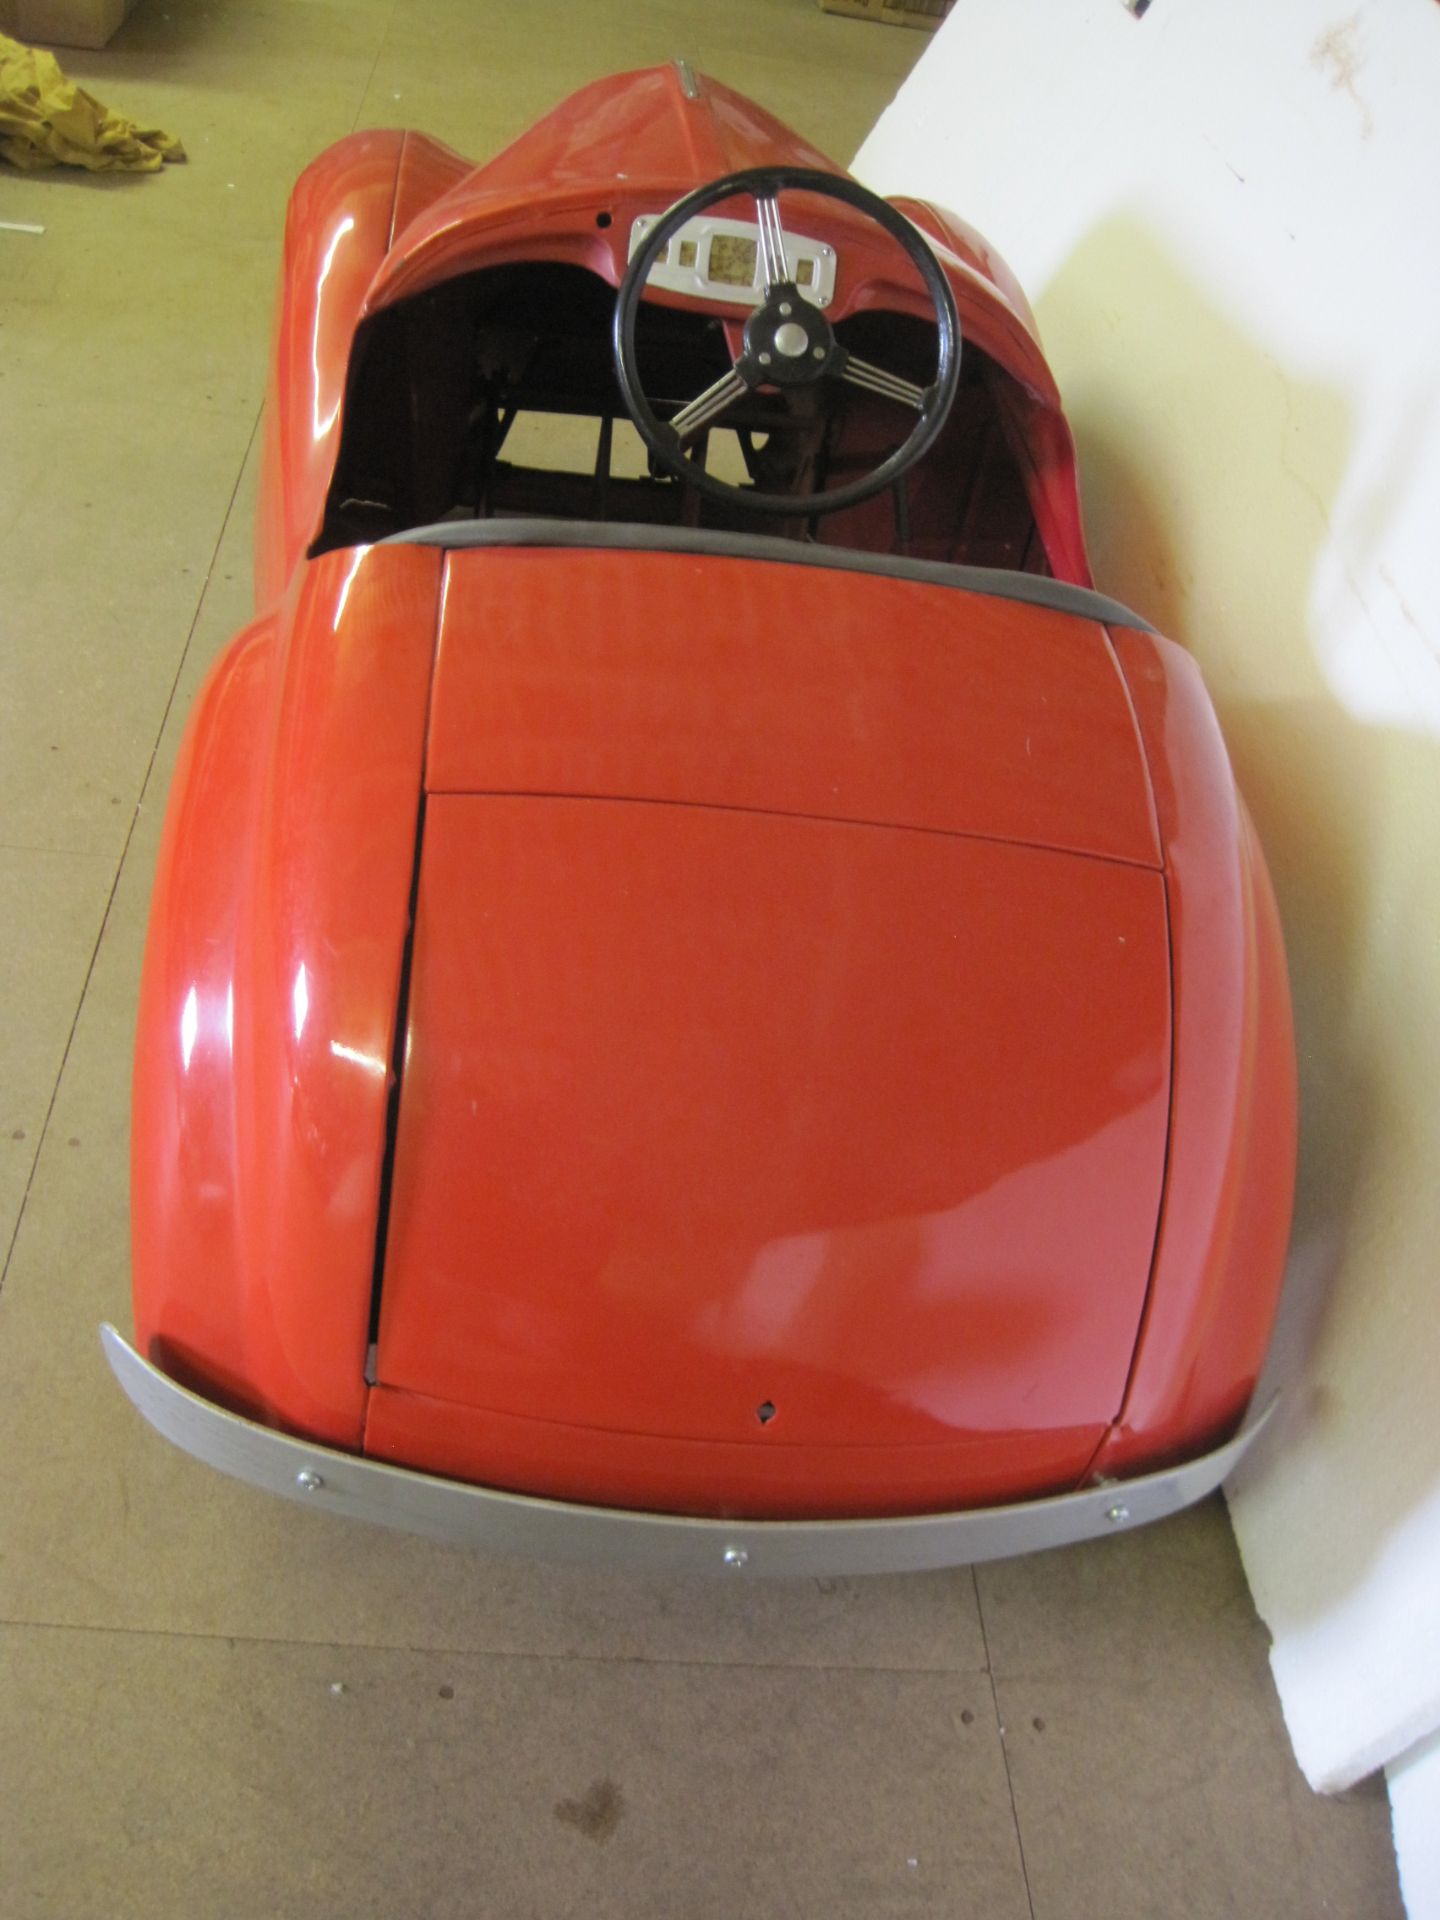 1948 Austin J40 pedal car, an older restoration from a private collection - Image 5 of 8